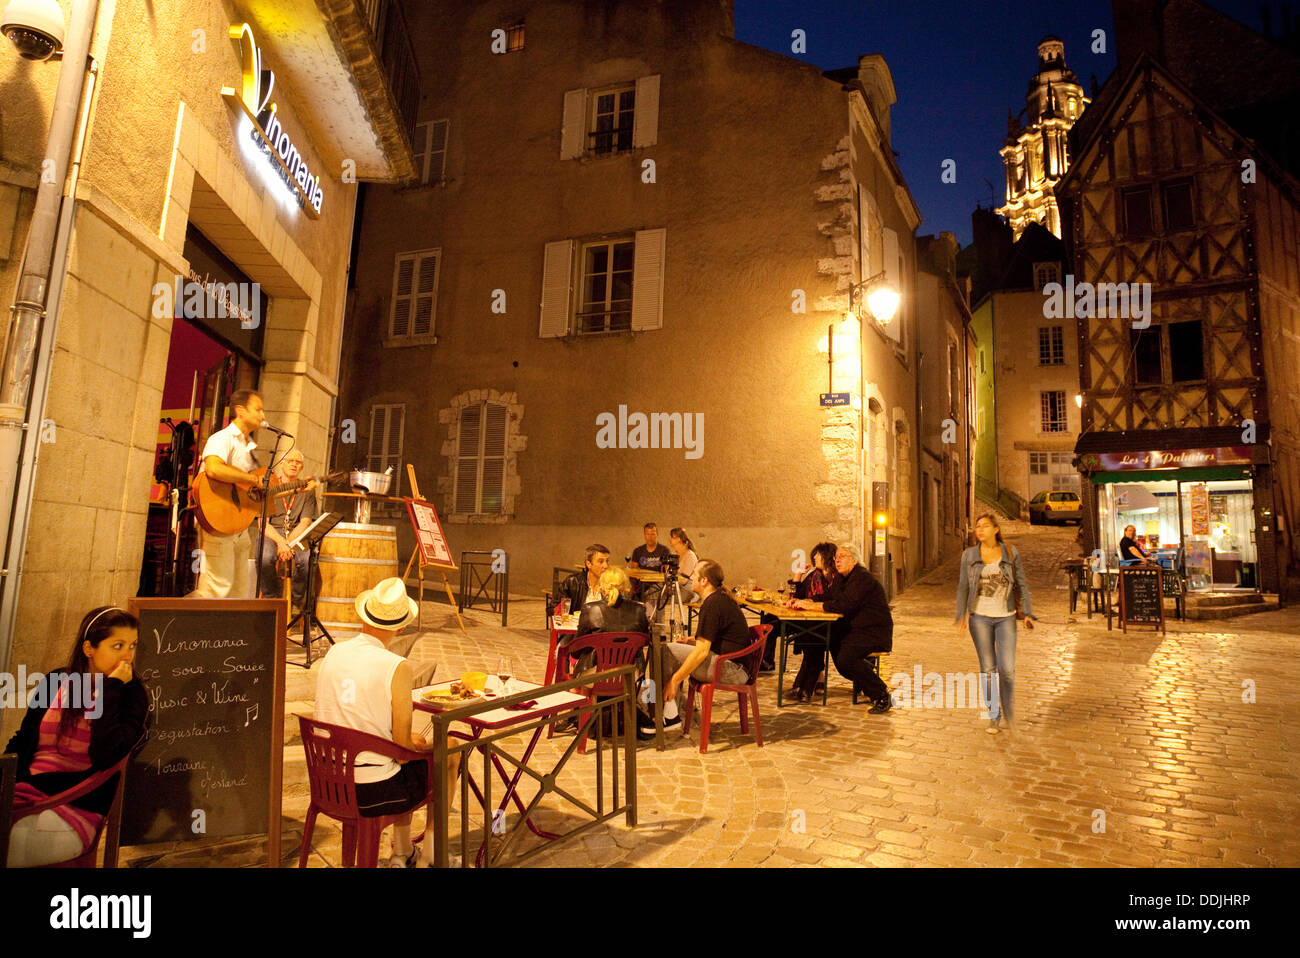 Street scene with people eating and drinking with music at restaurants and bars, Blois, Loir et Cher,  France Europe Stock Photo